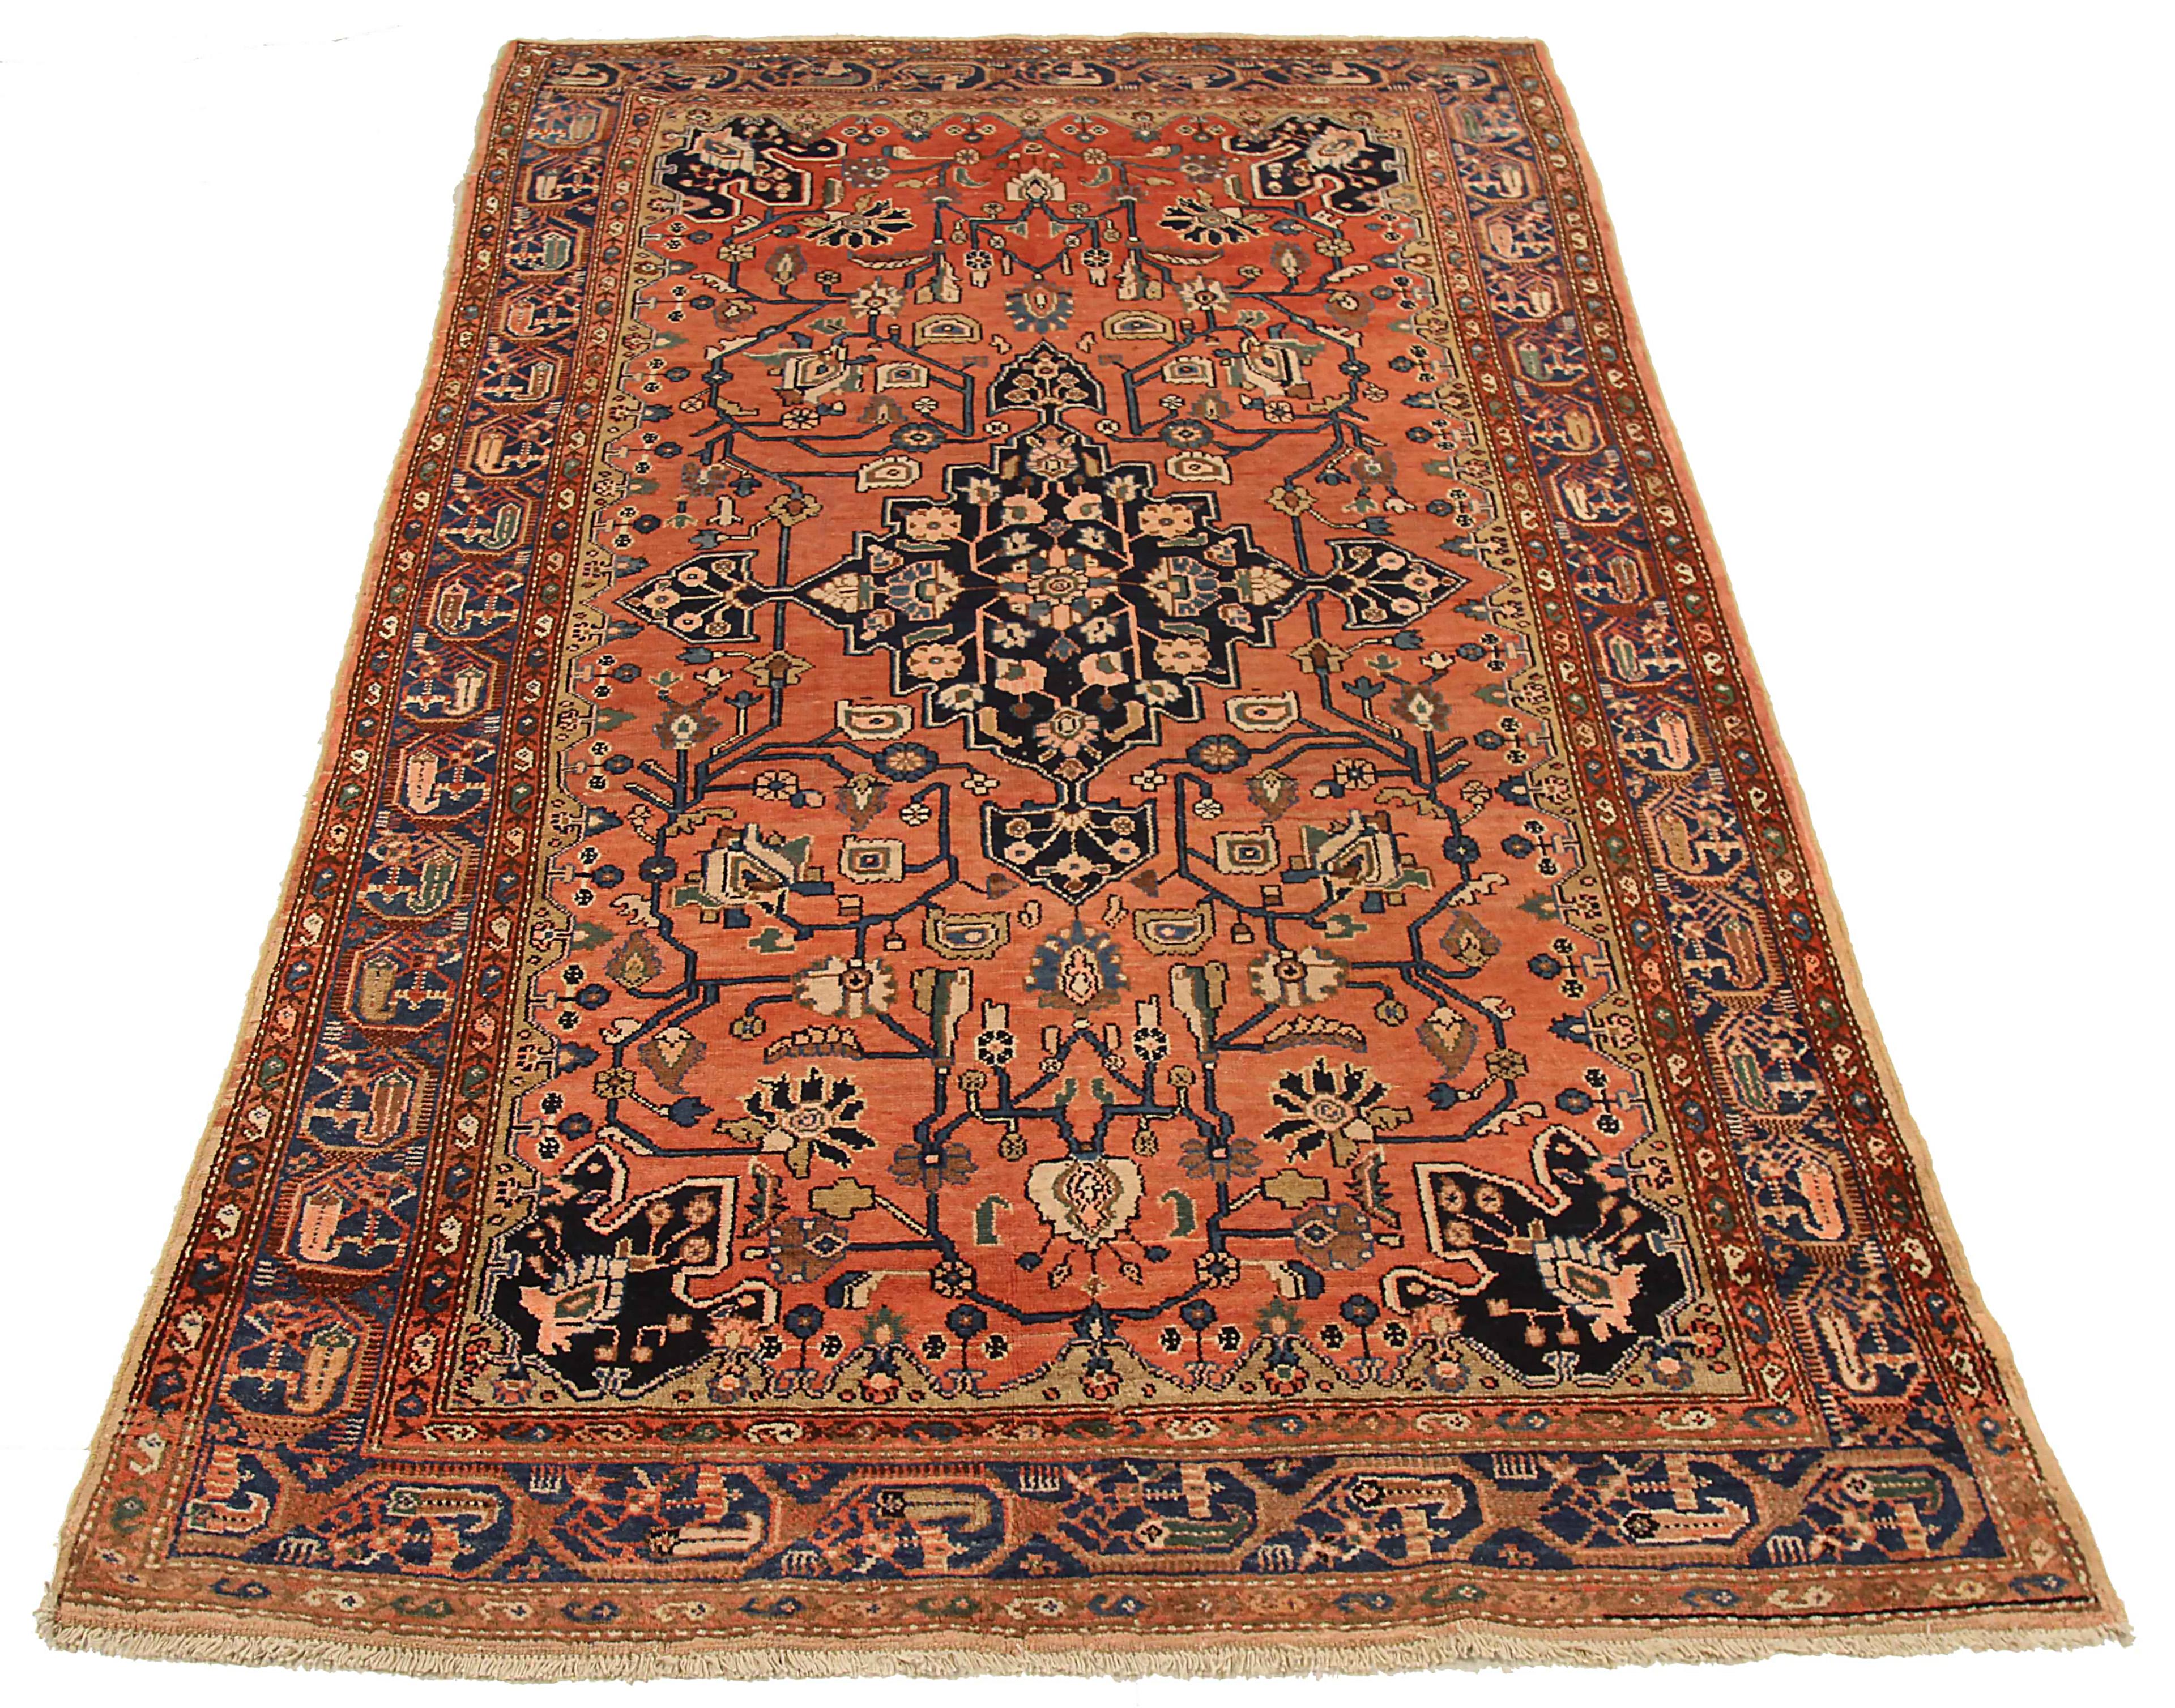 Antique Persian area rug handwoven from the finest sheep’s wool. It’s colored with all-natural vegetable dyes that are safe for humans and pets. It’s a traditional Hamedan design handwoven by expert artisans. It’s a lovely area rug that can be